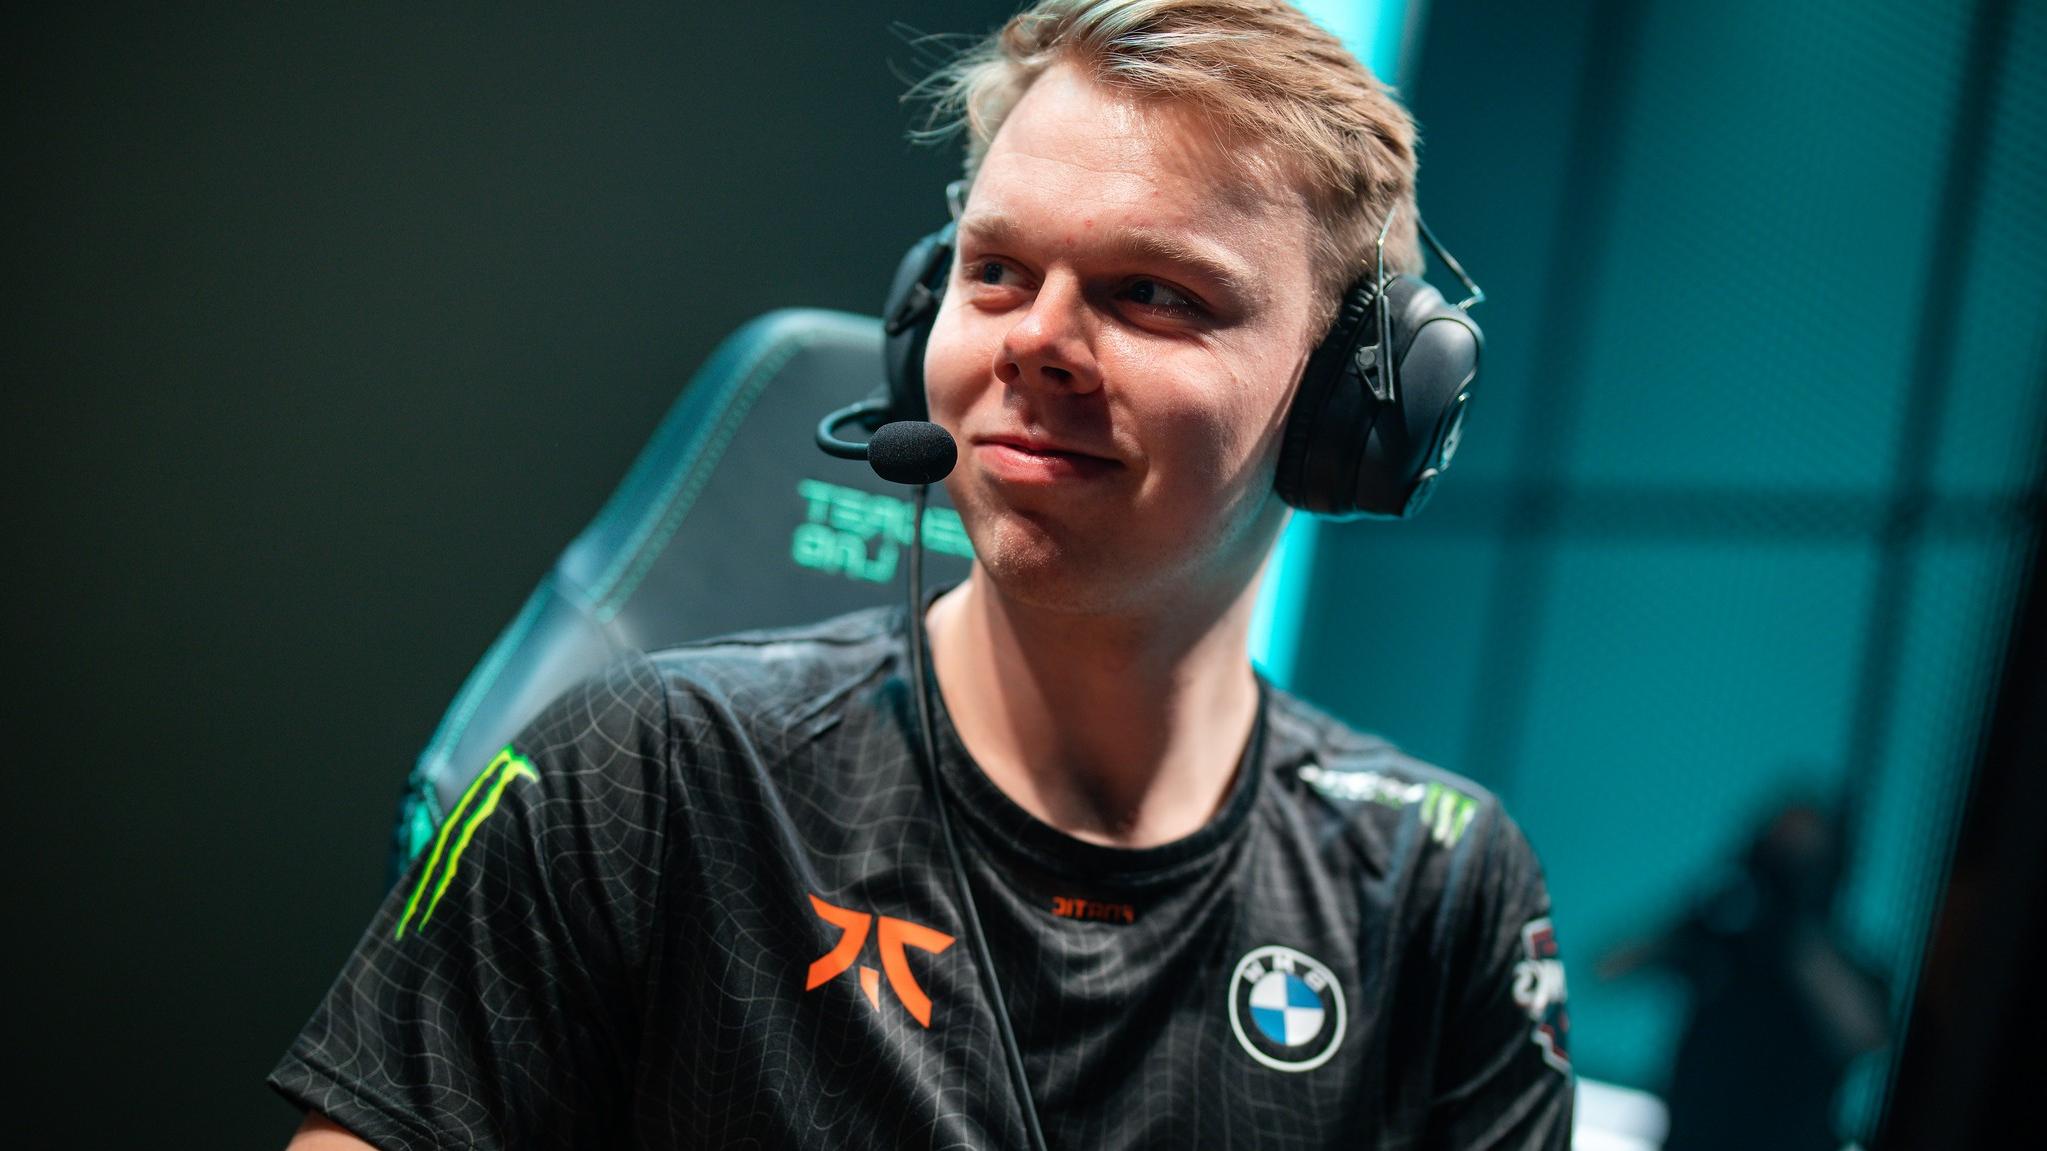 https://e.sport.fr/wp-content/uploads/2022/06/Fnatic-Wunder-G2-is-probably-the-strongest-team-apart-from-us.jpeg